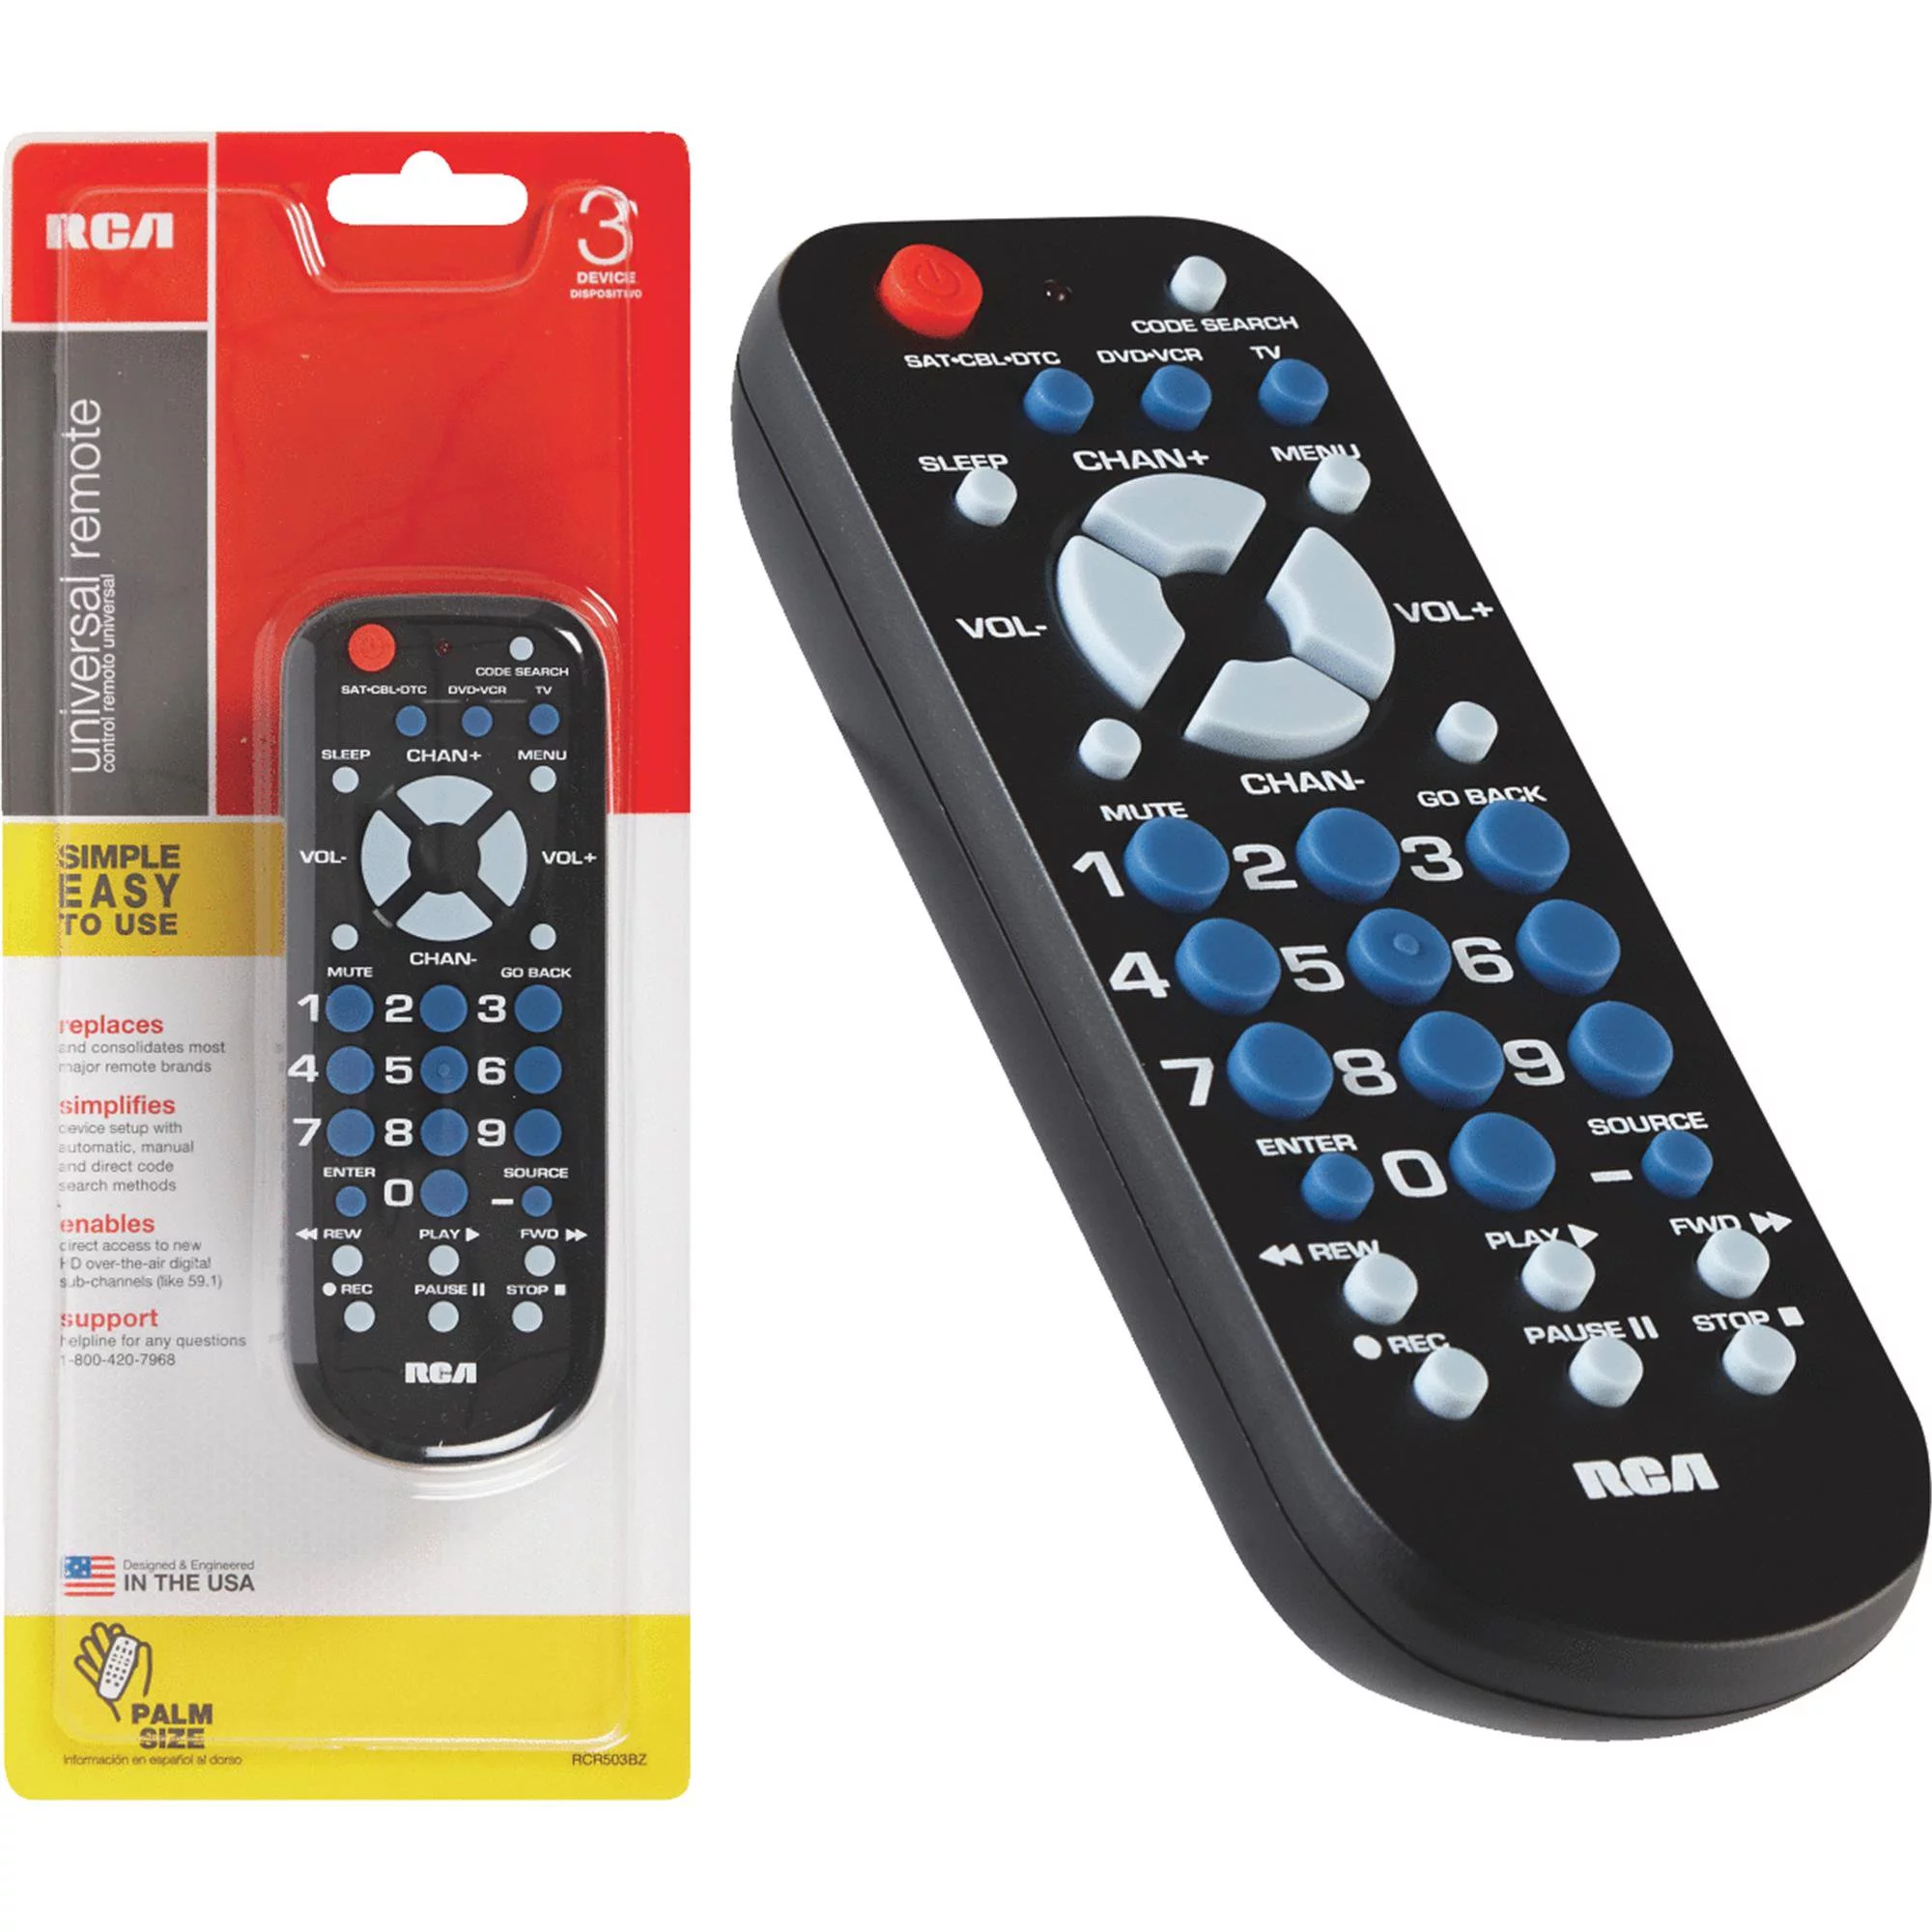 11 Amazing Universal Remote For DVD Player For 2023